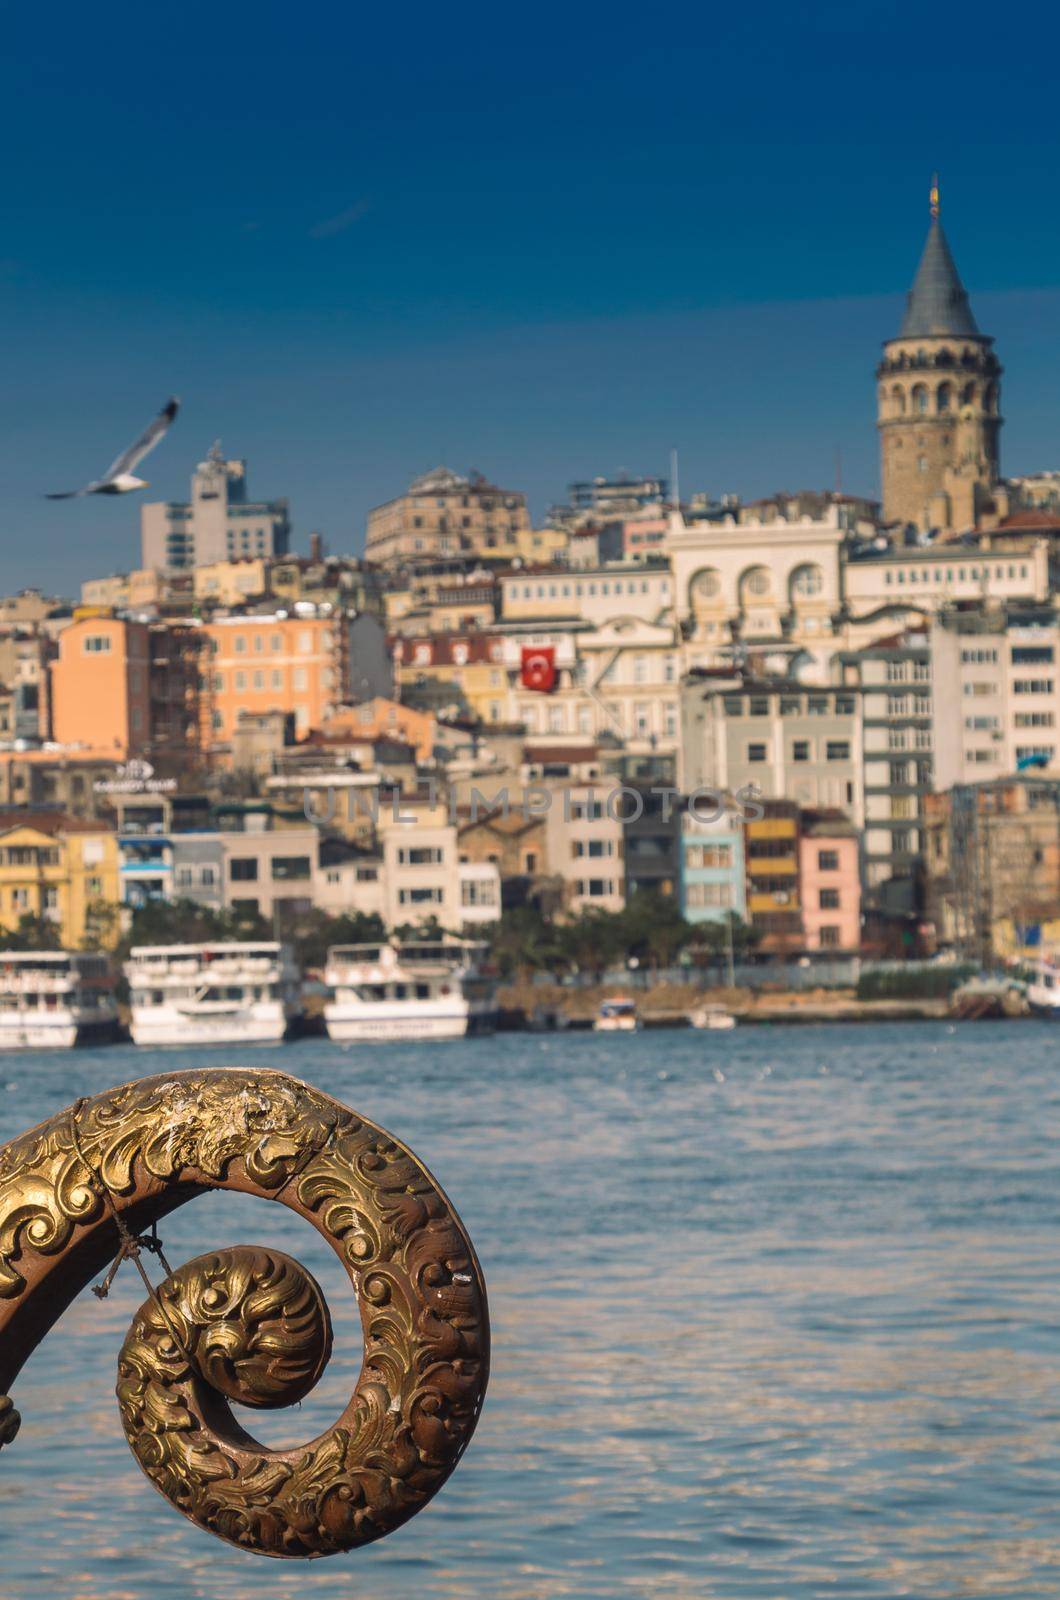 View of the Galata Tower from the Golden Horn  by berkay